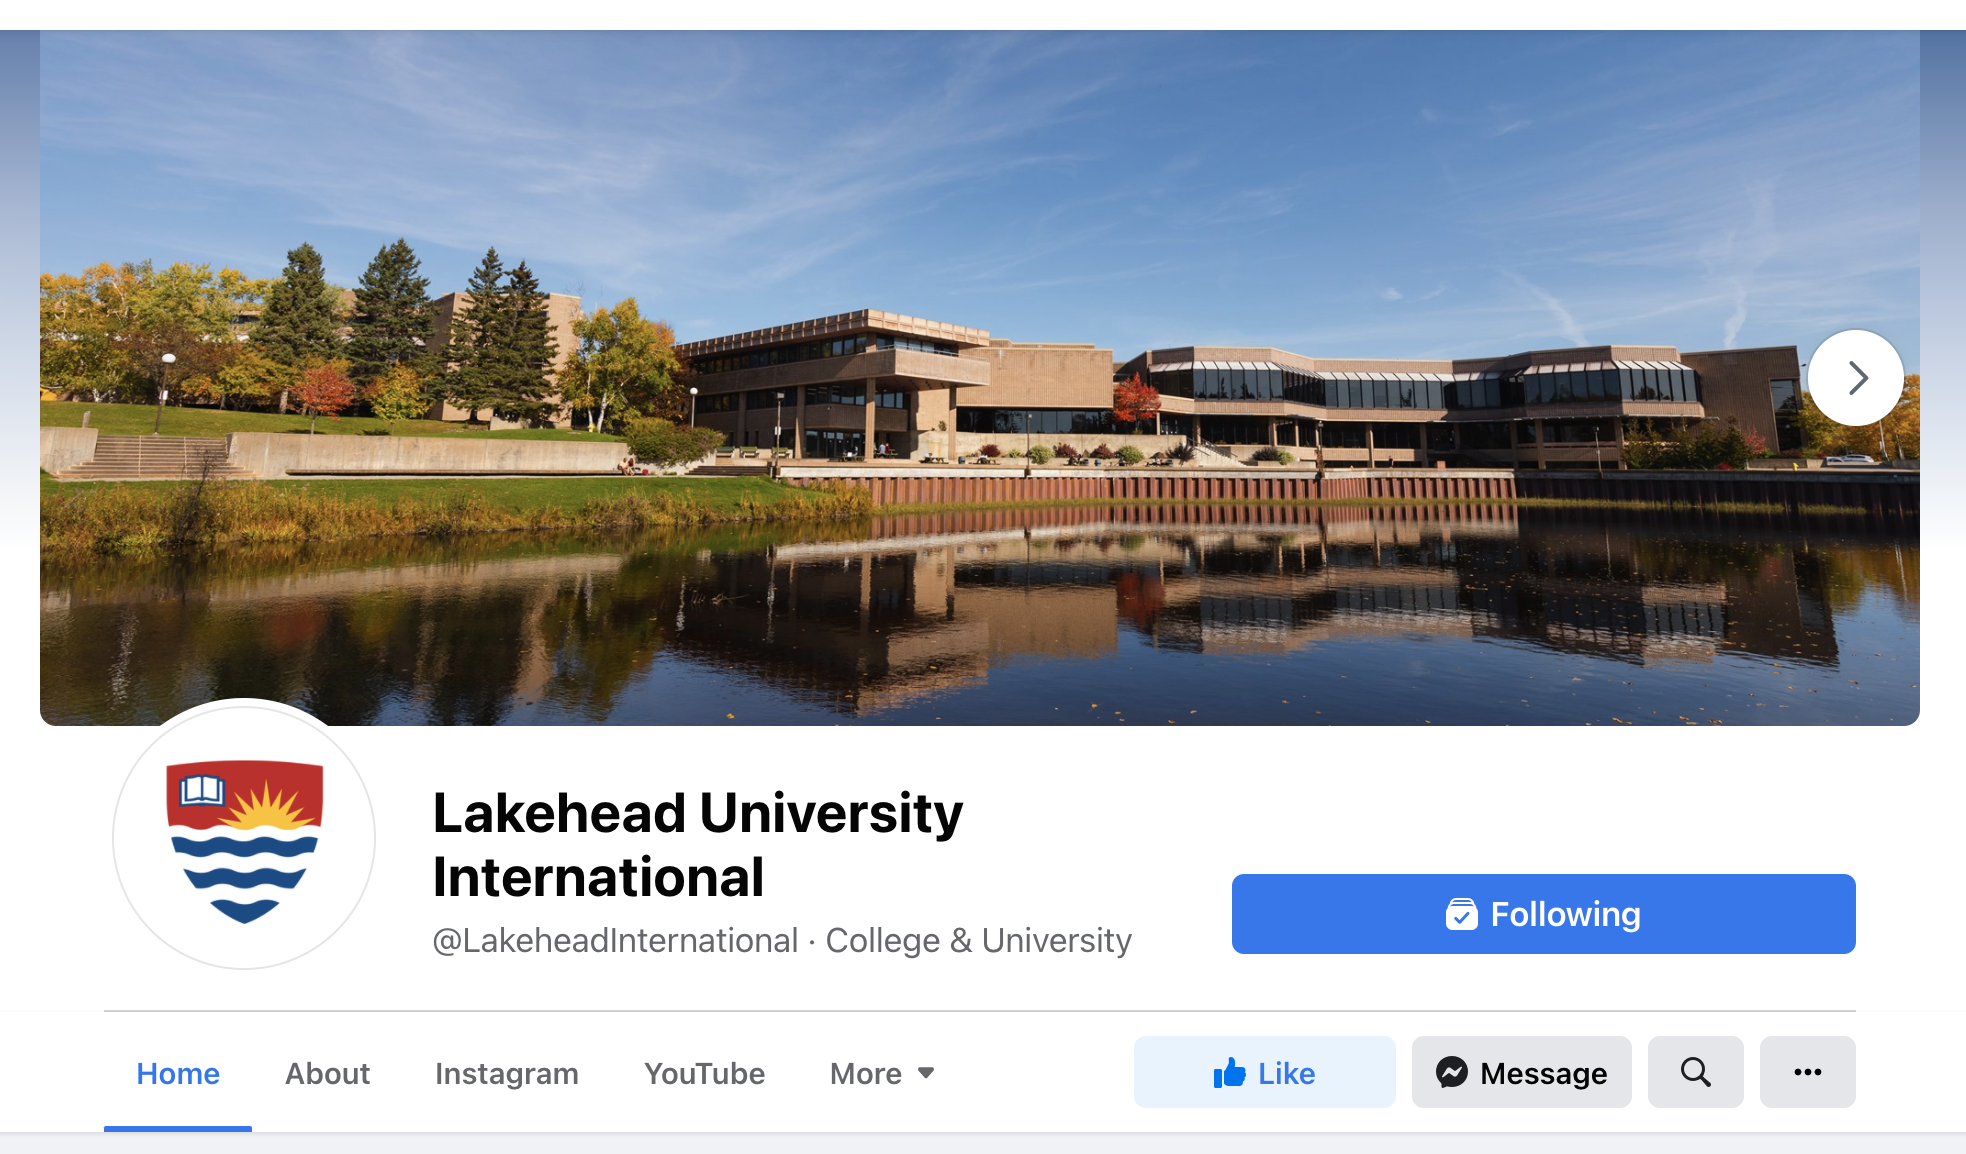 Lakehead University International facebook page profile and cover photo